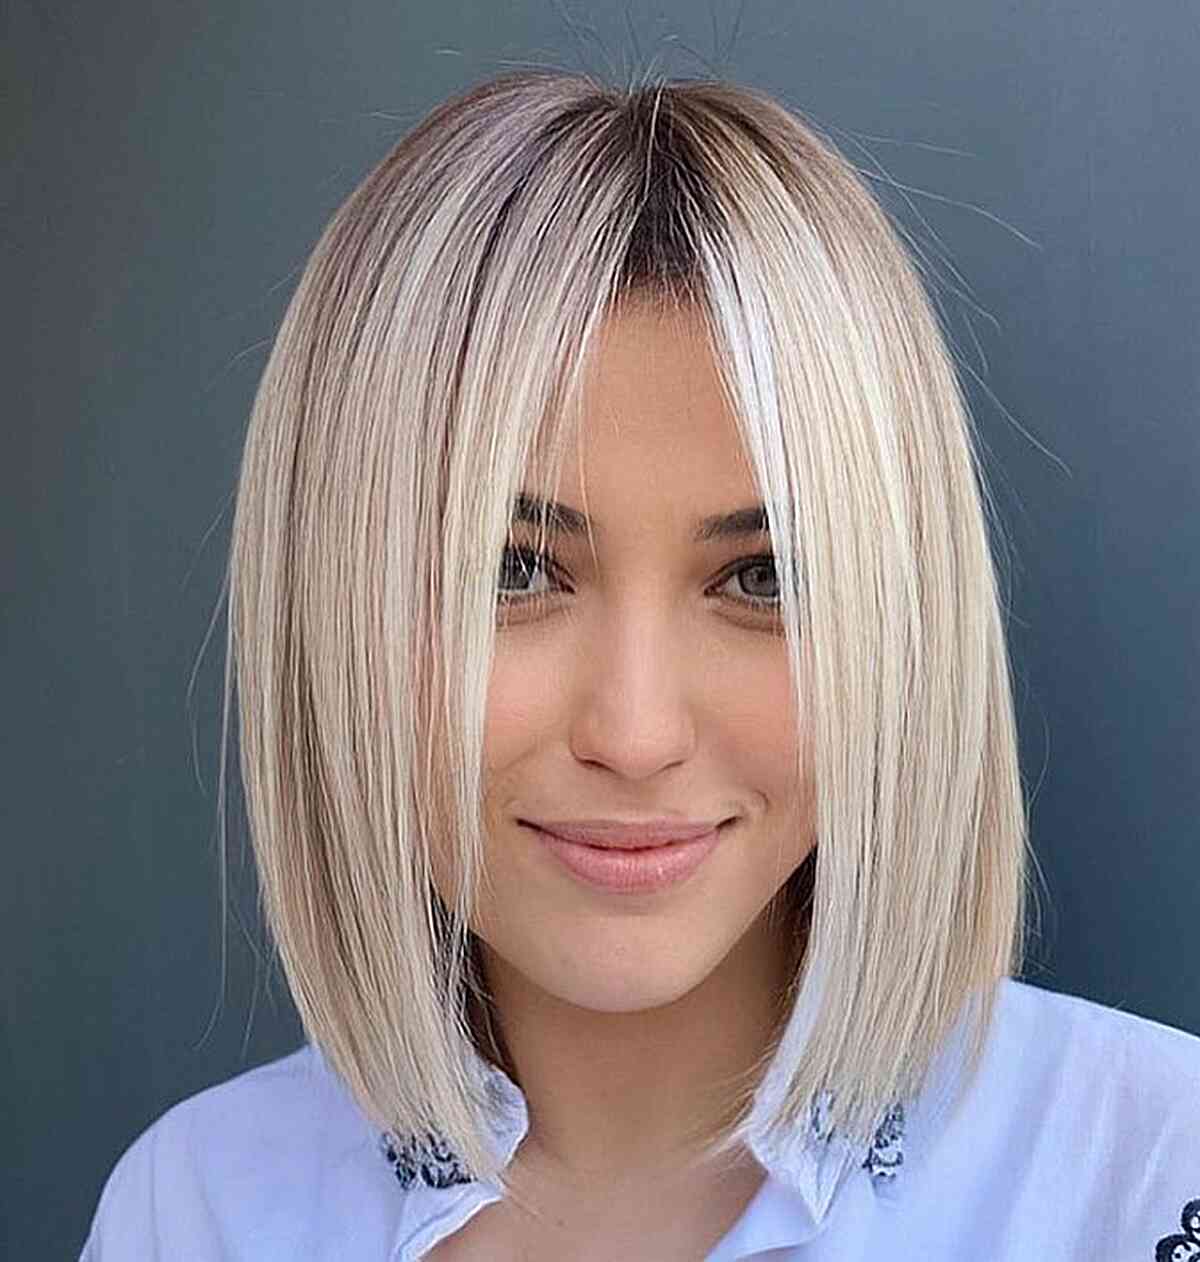 Simple Bob Haircut with No Bangs for women in their 20s with straight hair